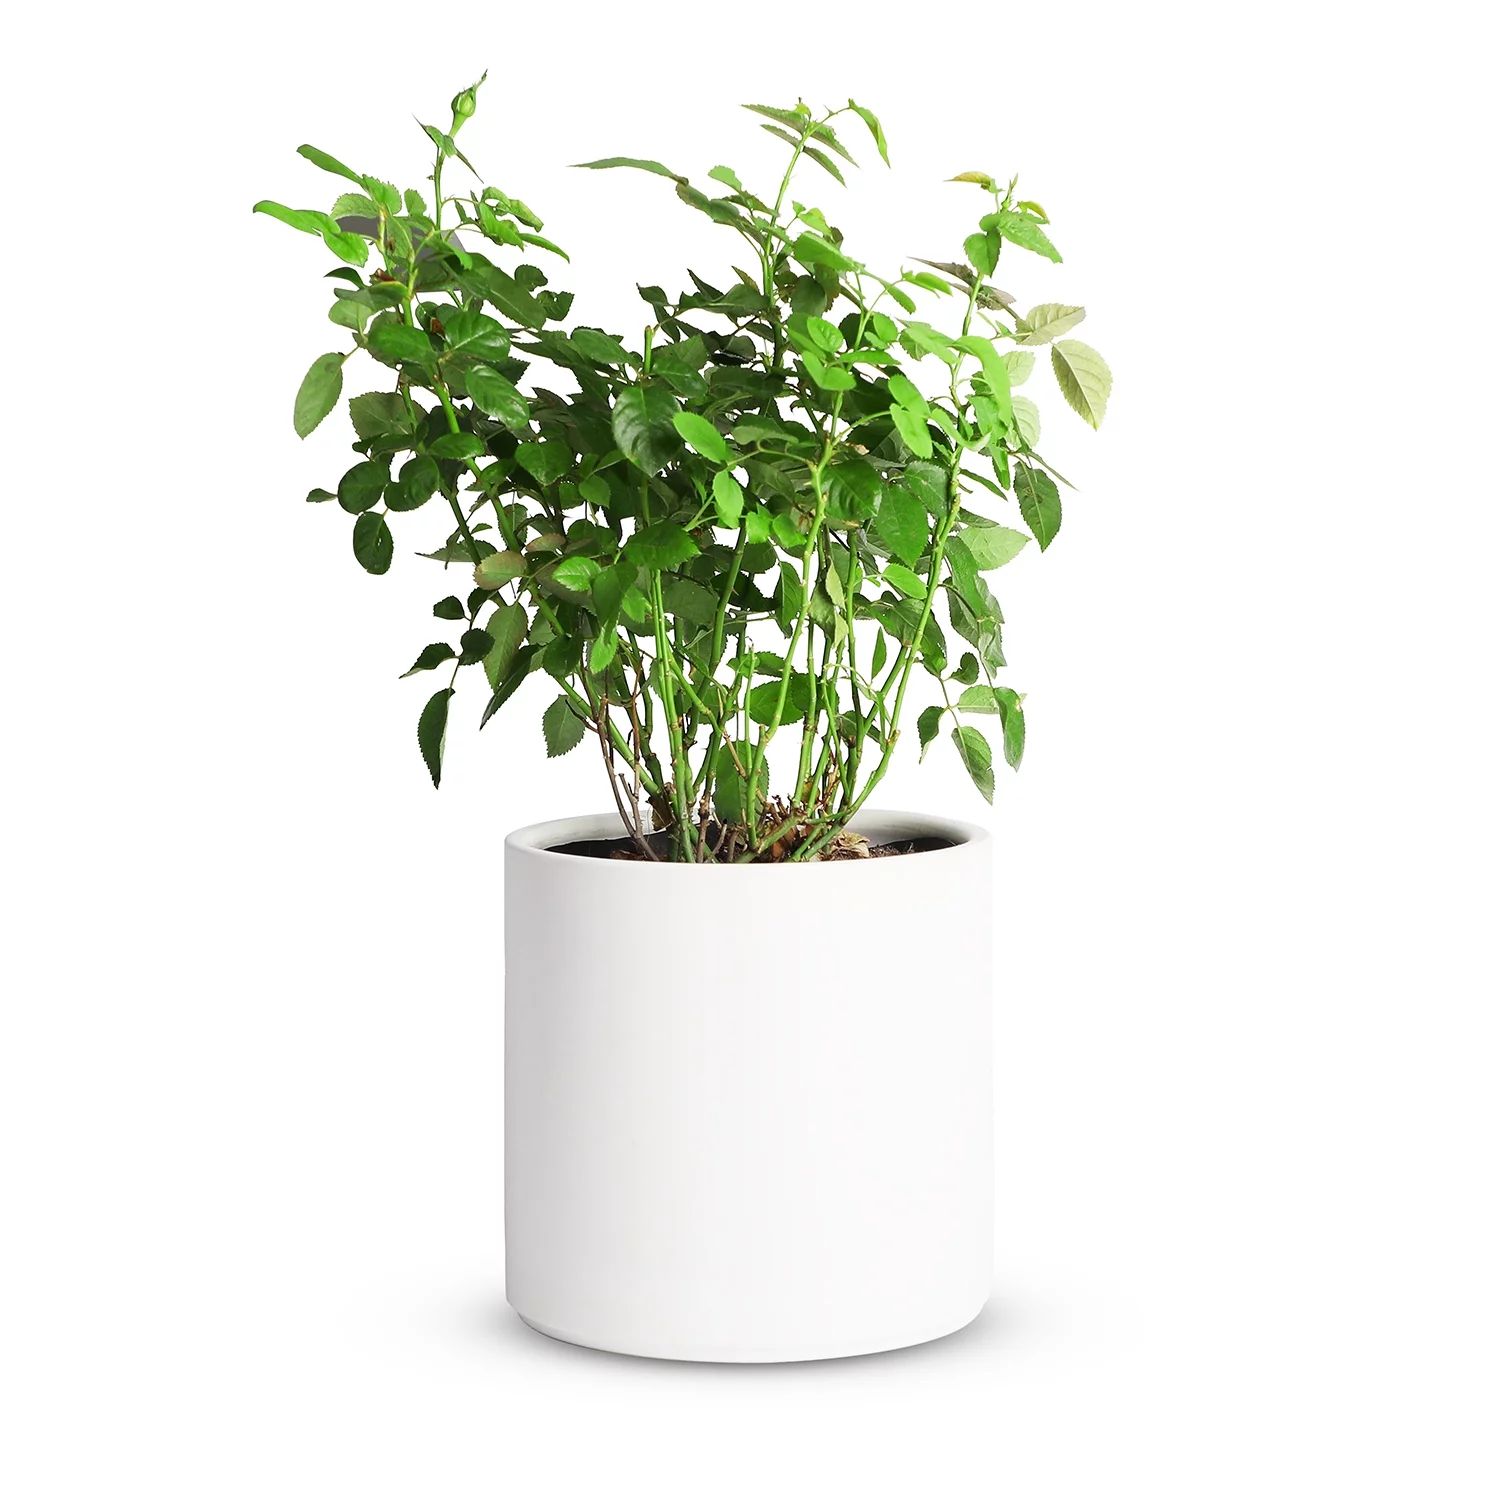 Mozing Ceramic Plant Pots Indoor - 12 x 12 inch Modern Flower Pot with Drainage Hole (White) | Walmart (US)